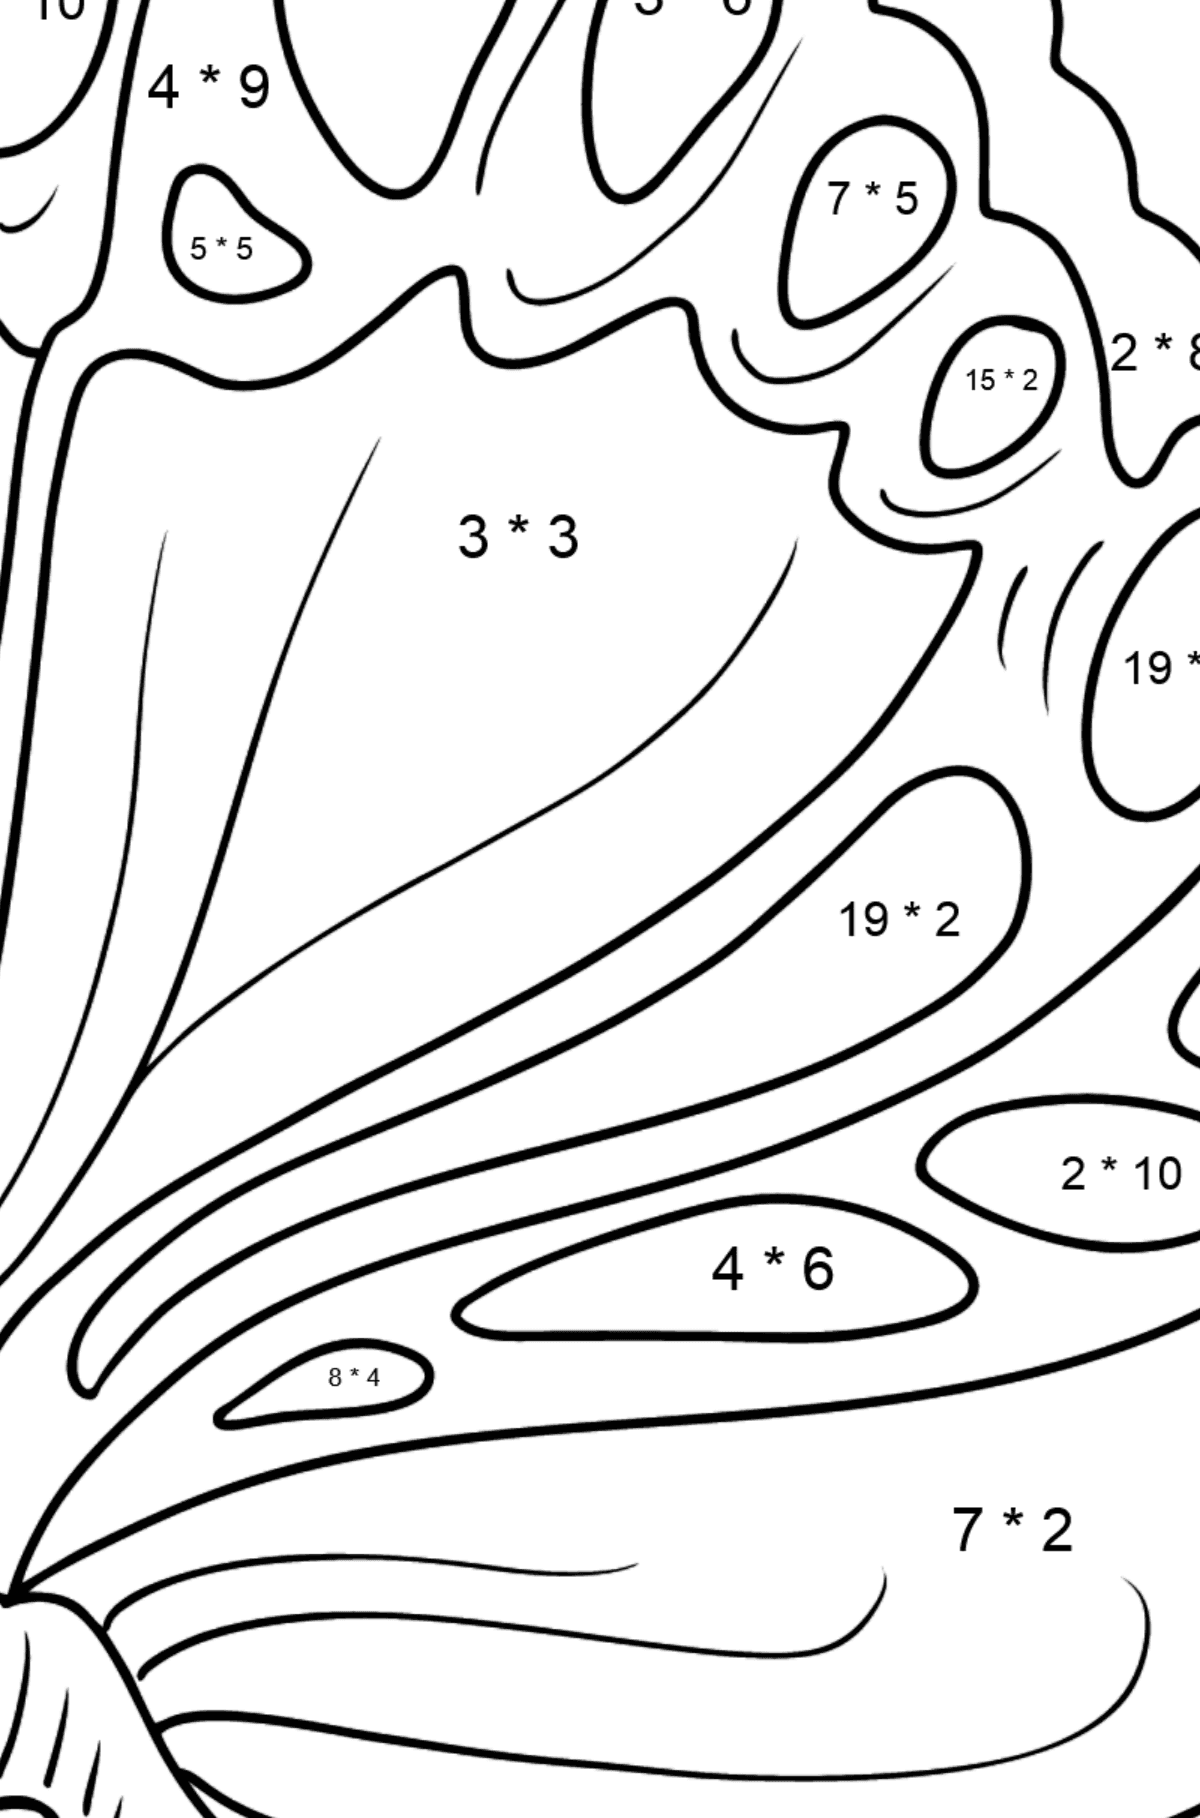 Butterfly Sideways coloring page - Math Coloring - Multiplication for Kids